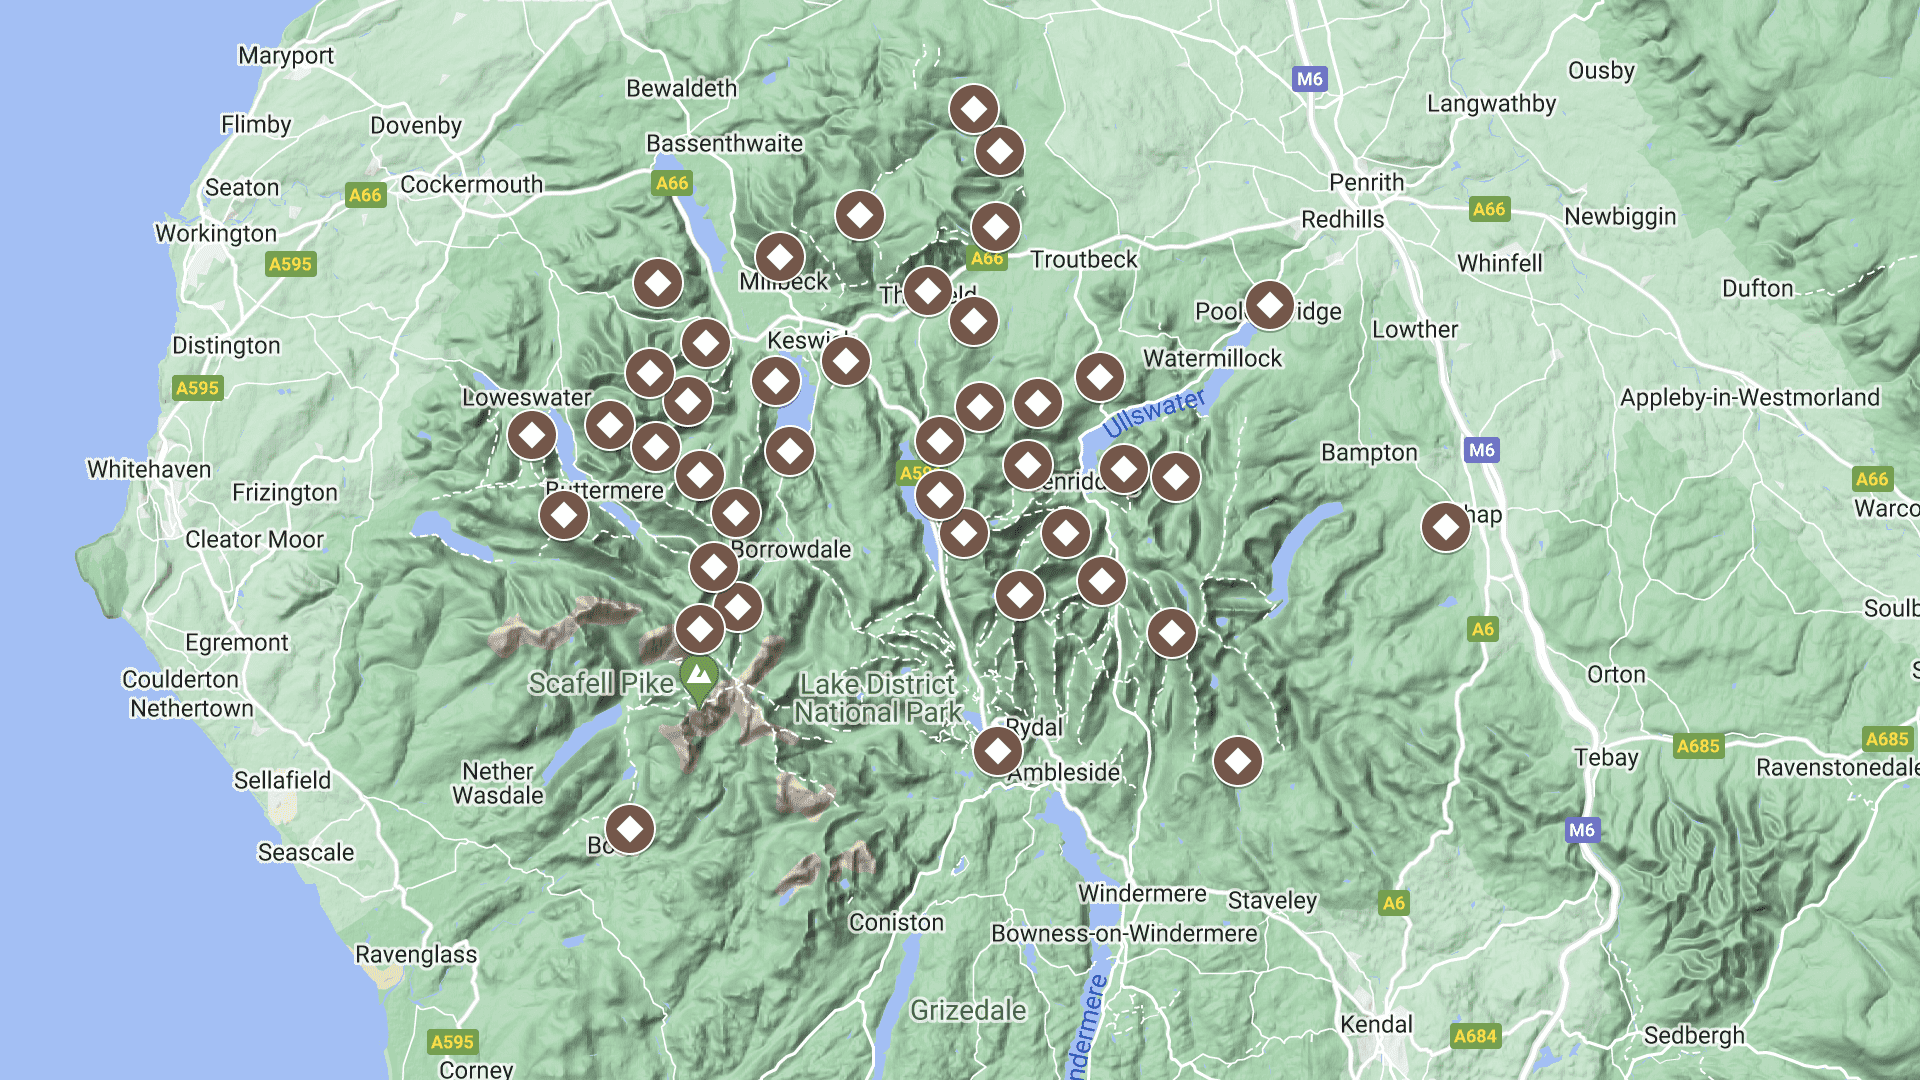 Use my interactive walking maps to discover the beauty of eight captivating regions in Northern England. Scroll down and click or tap a diamond on any of the maps to reveal a side panel with the name of the walking route and a link to its dedicated page. The areas I've explored are: Howardian Hills, Lake District, Nidderdale, North Pennines, North York Moors, Northern England, Yorkshire Coast, and Yorkshire Dales.